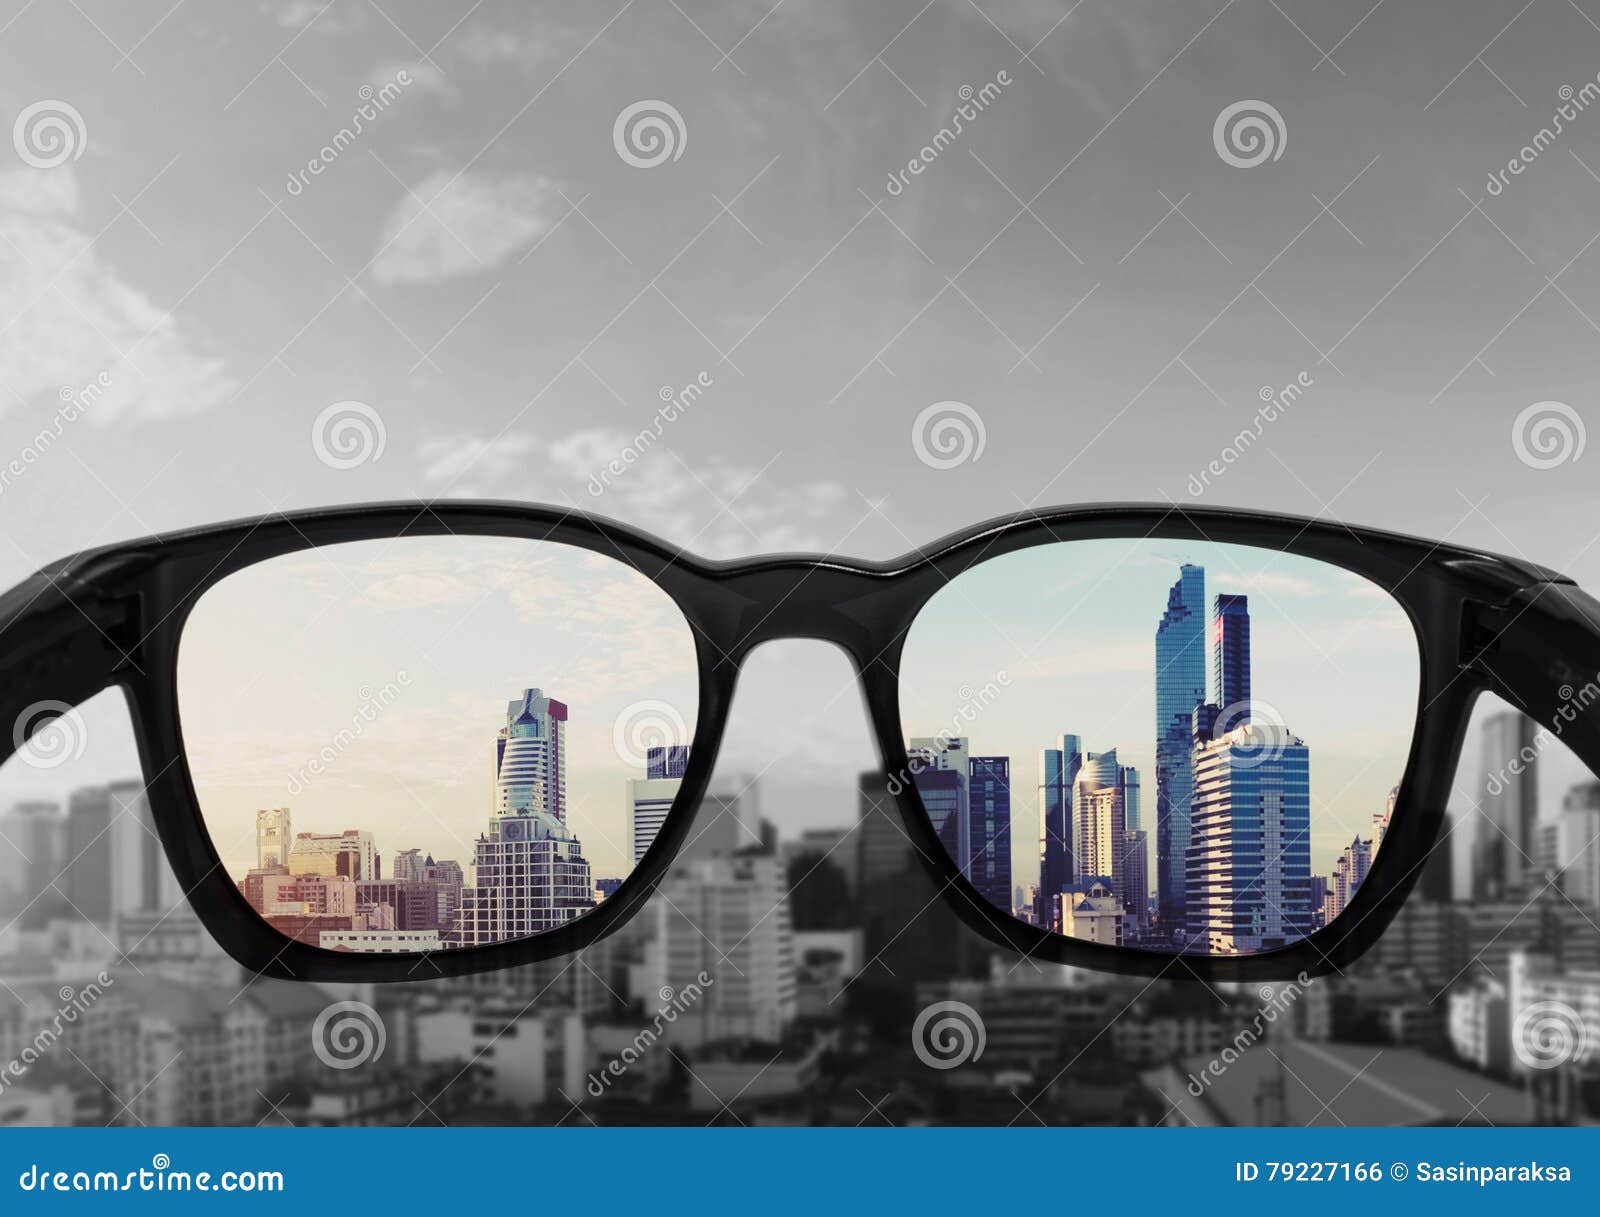 eye glasses looking to city view, focused on glasses lens